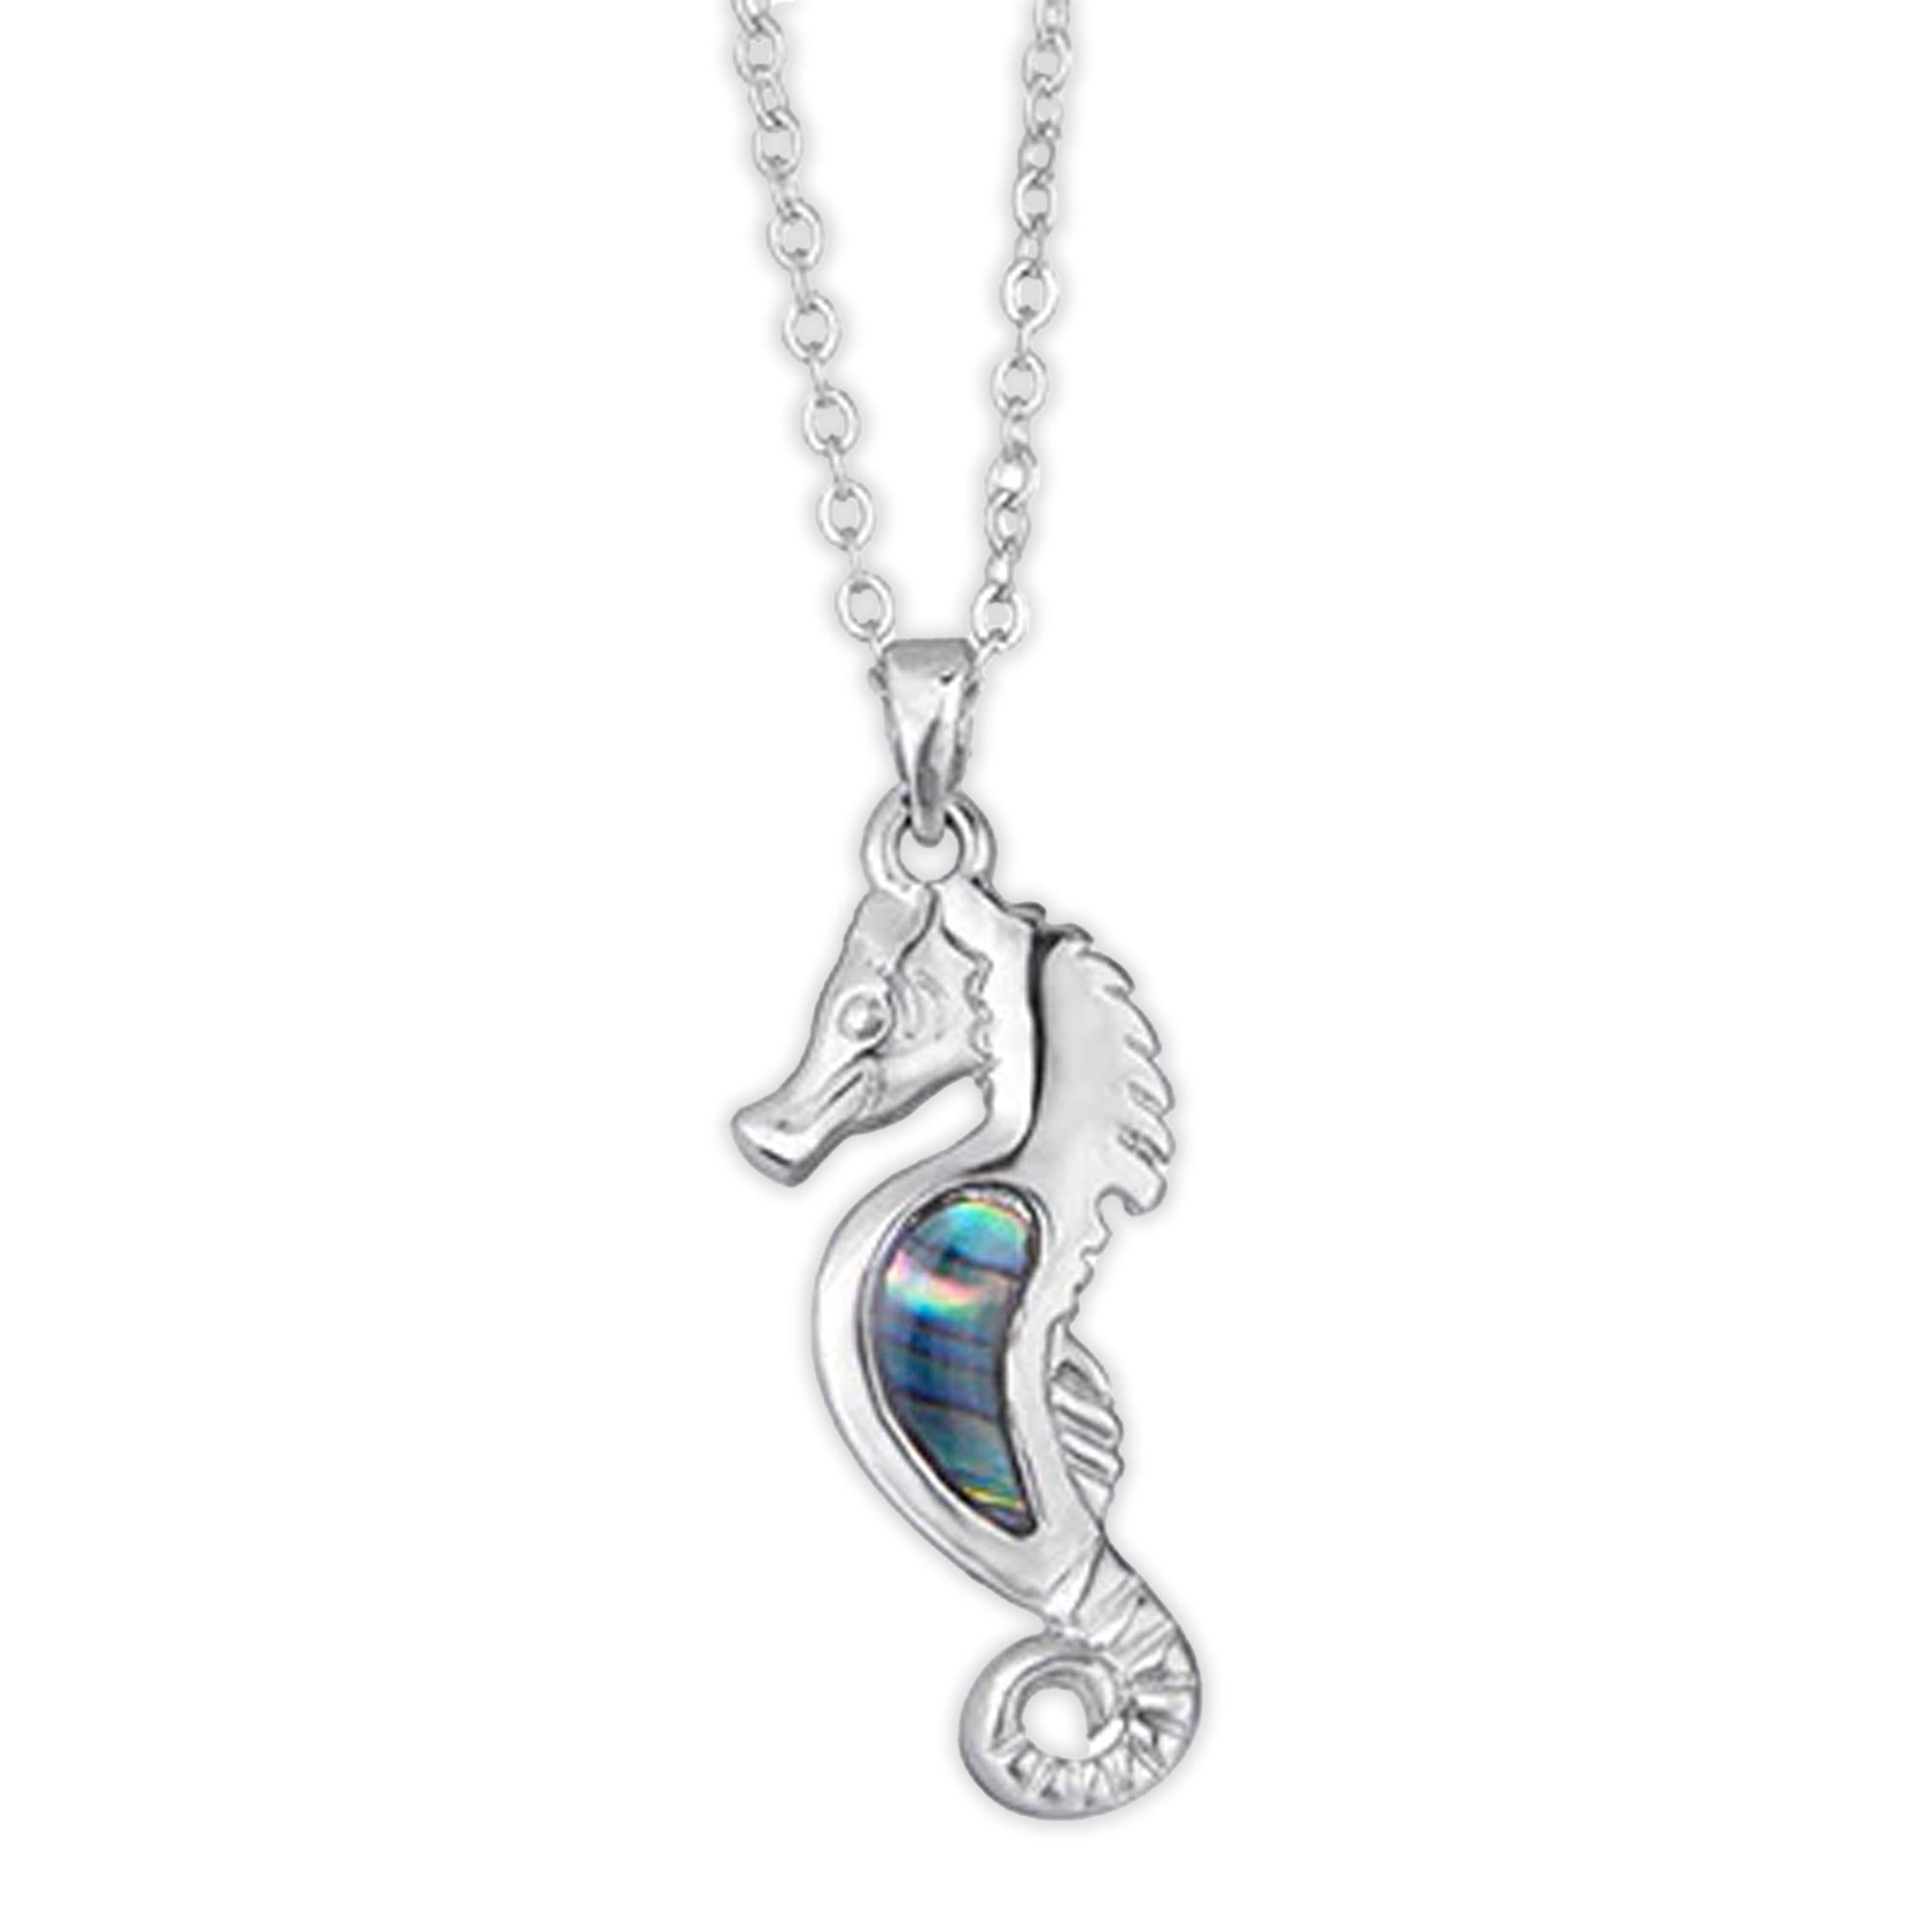 Ocean Water Abalone Seahorse Necklace